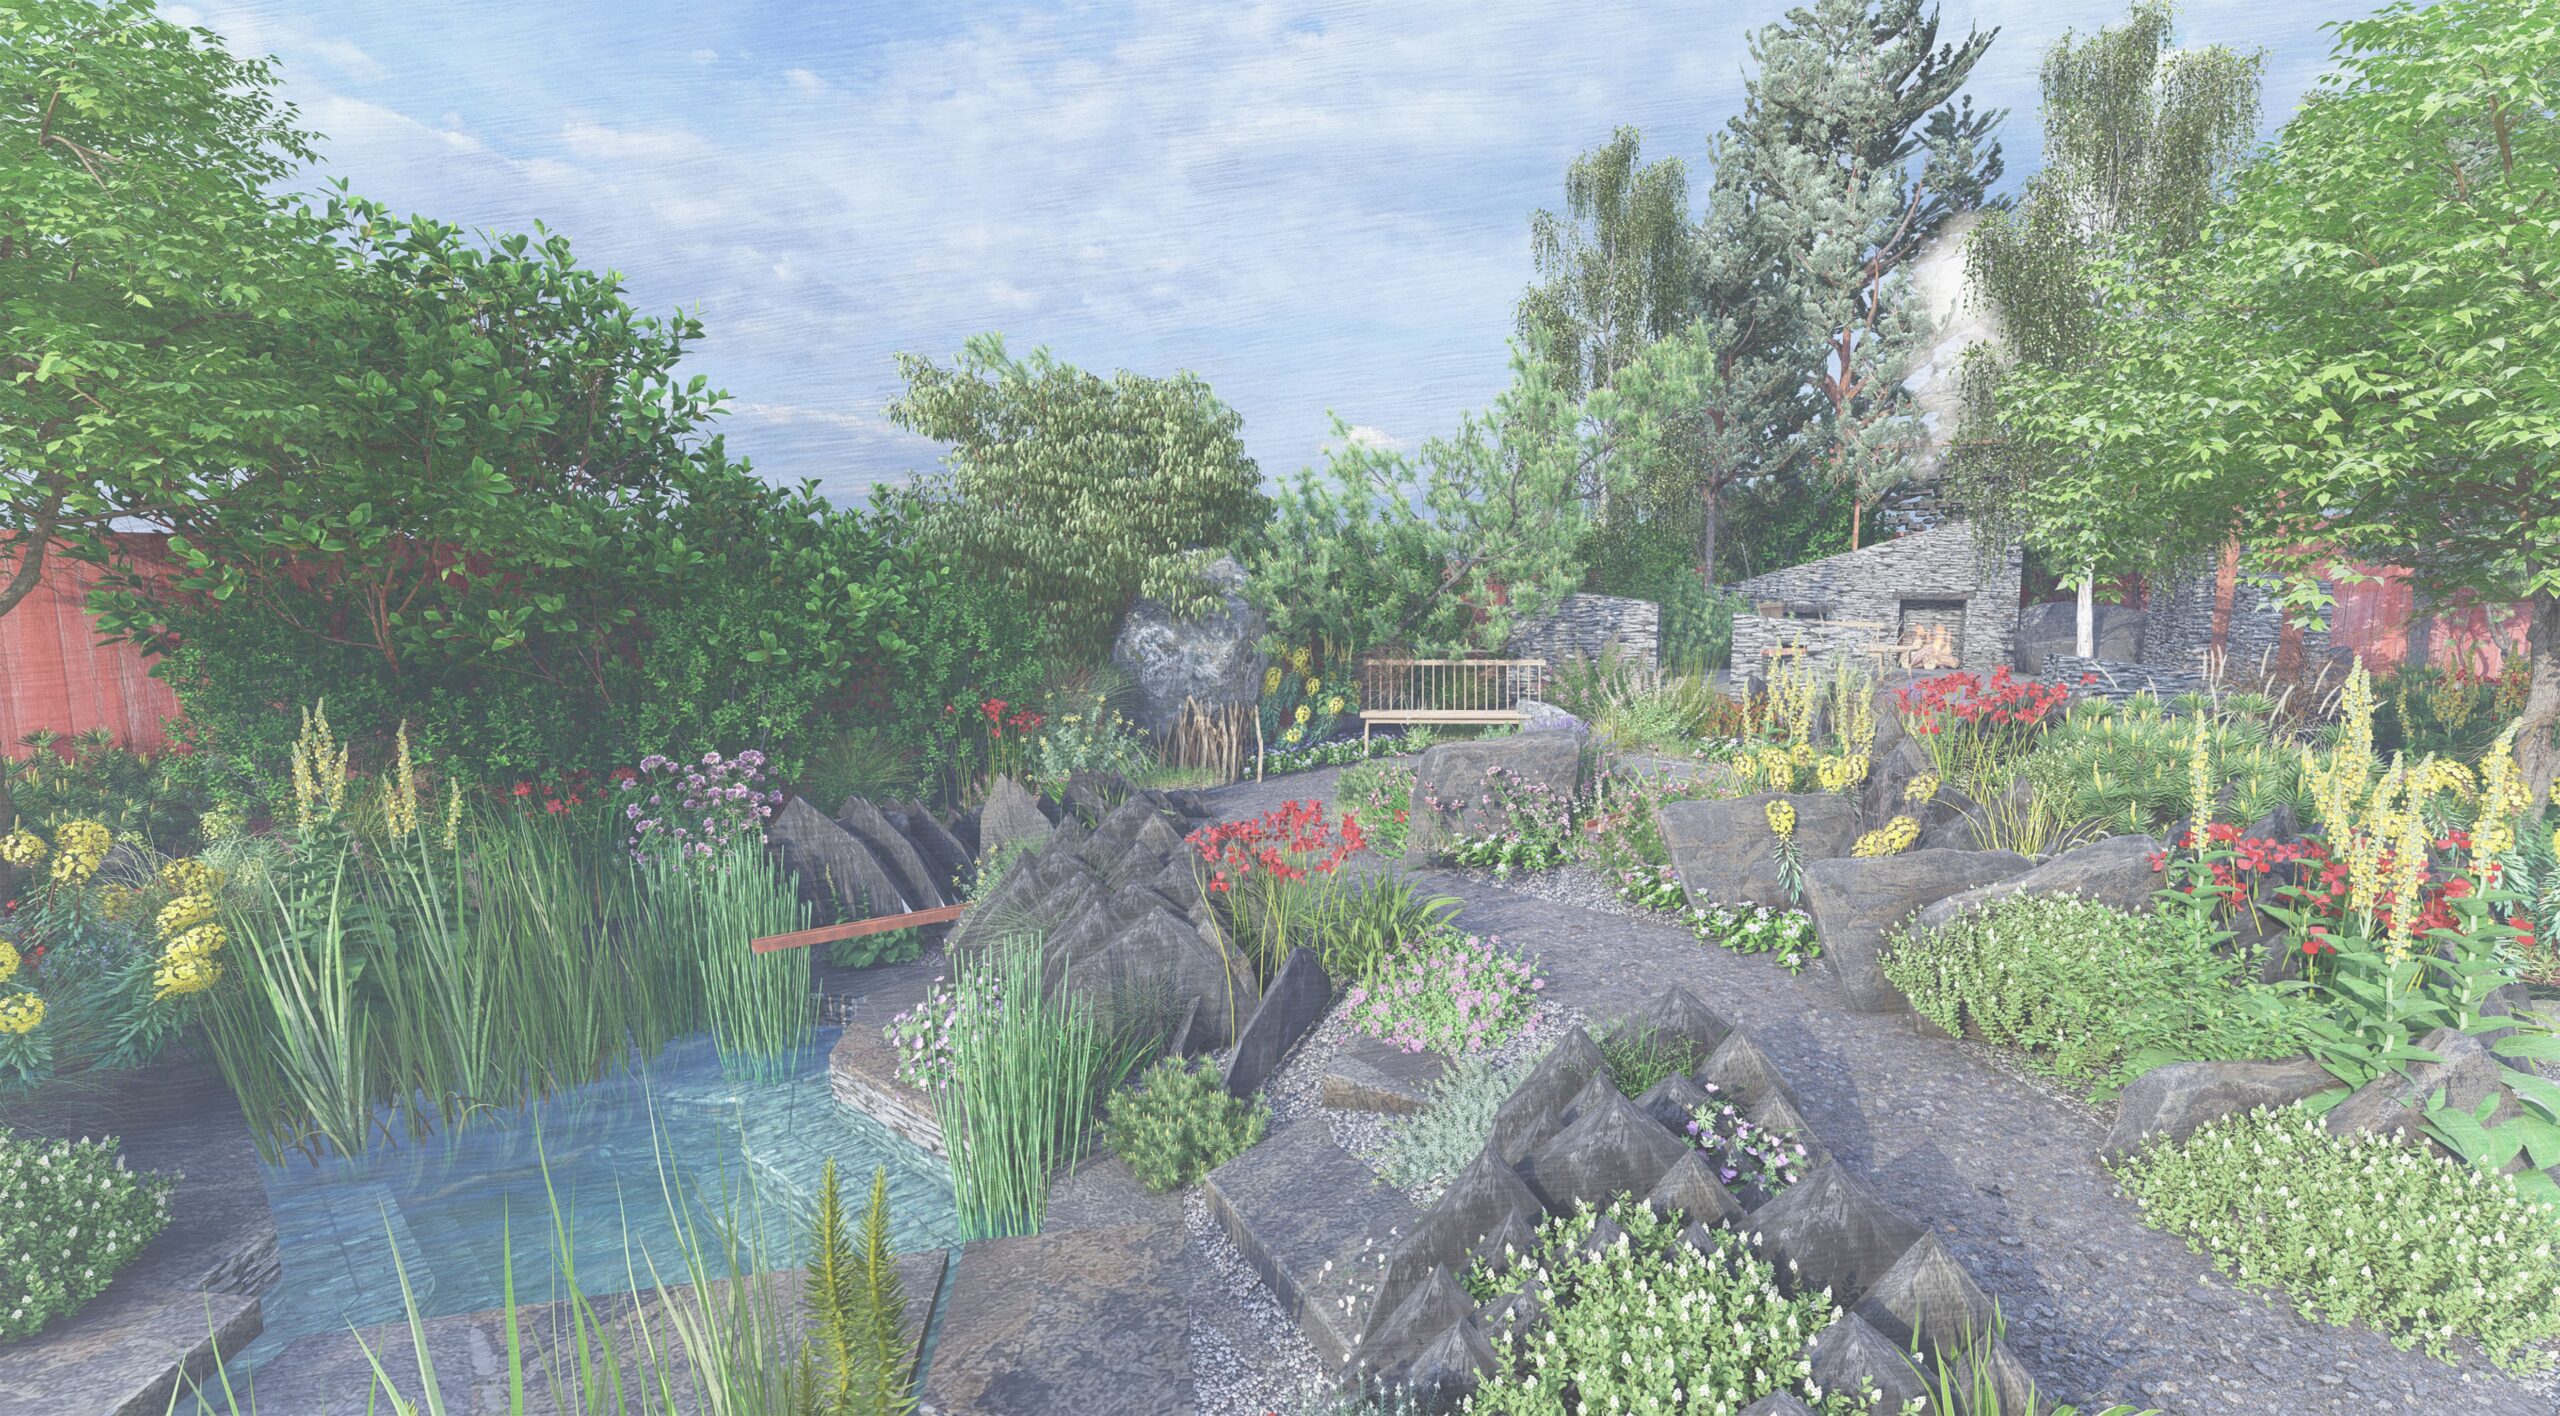 Half of Brits uncomfortable kissing someone living with HIV, as stigma-busting garden debuts at RHS Chelsea Flower Show